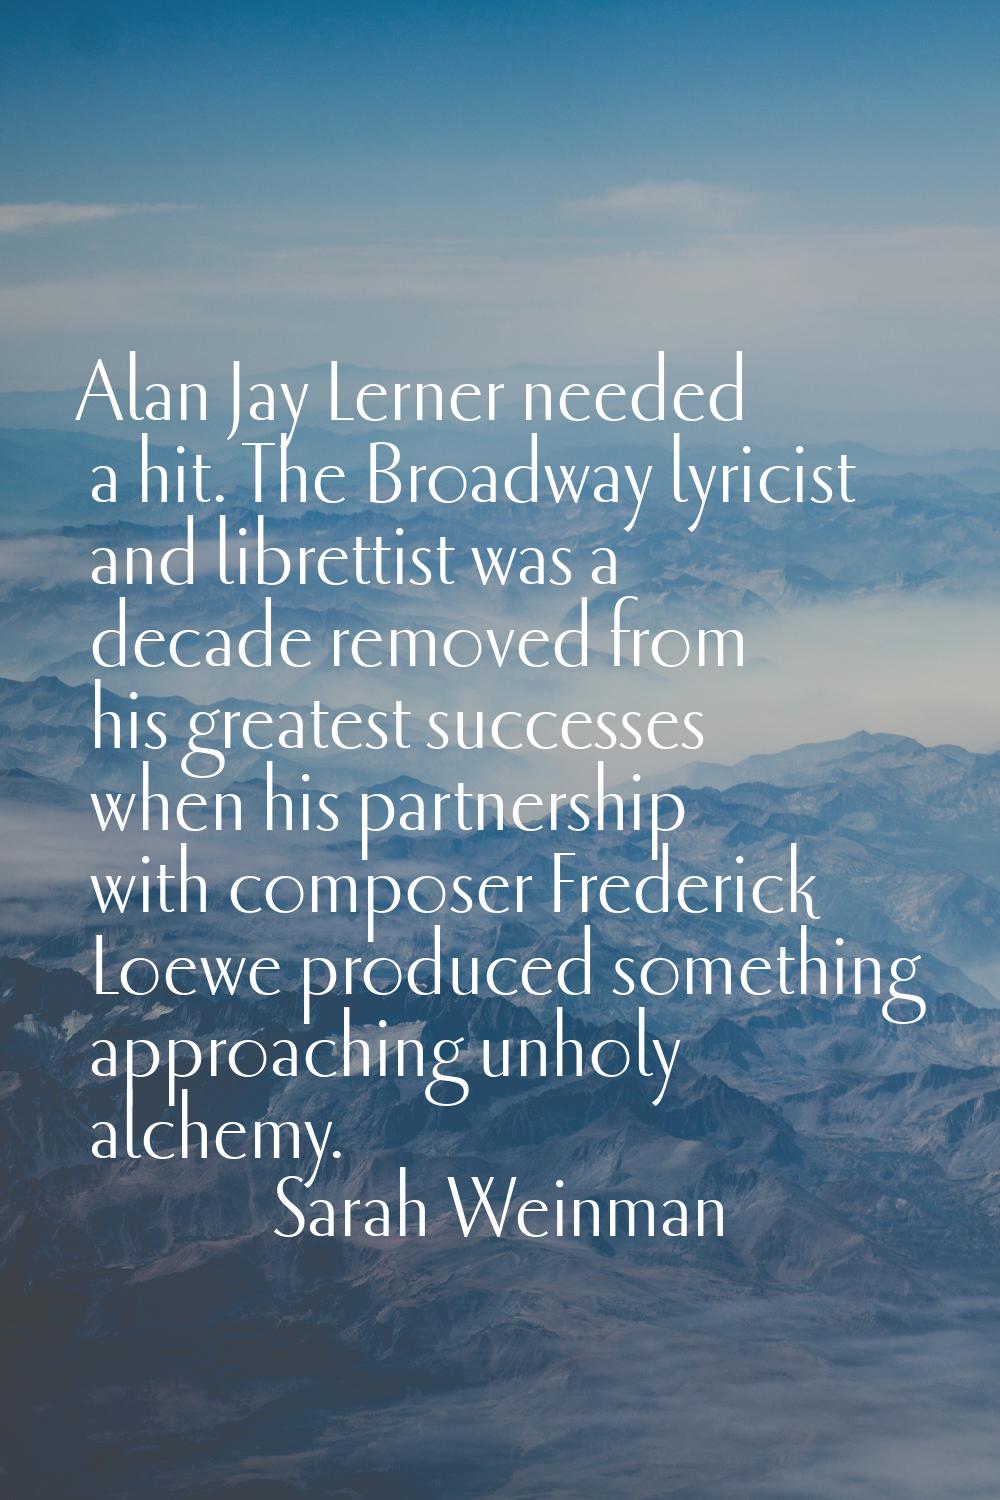 Alan Jay Lerner needed a hit. The Broadway lyricist and librettist was a decade removed from his gr